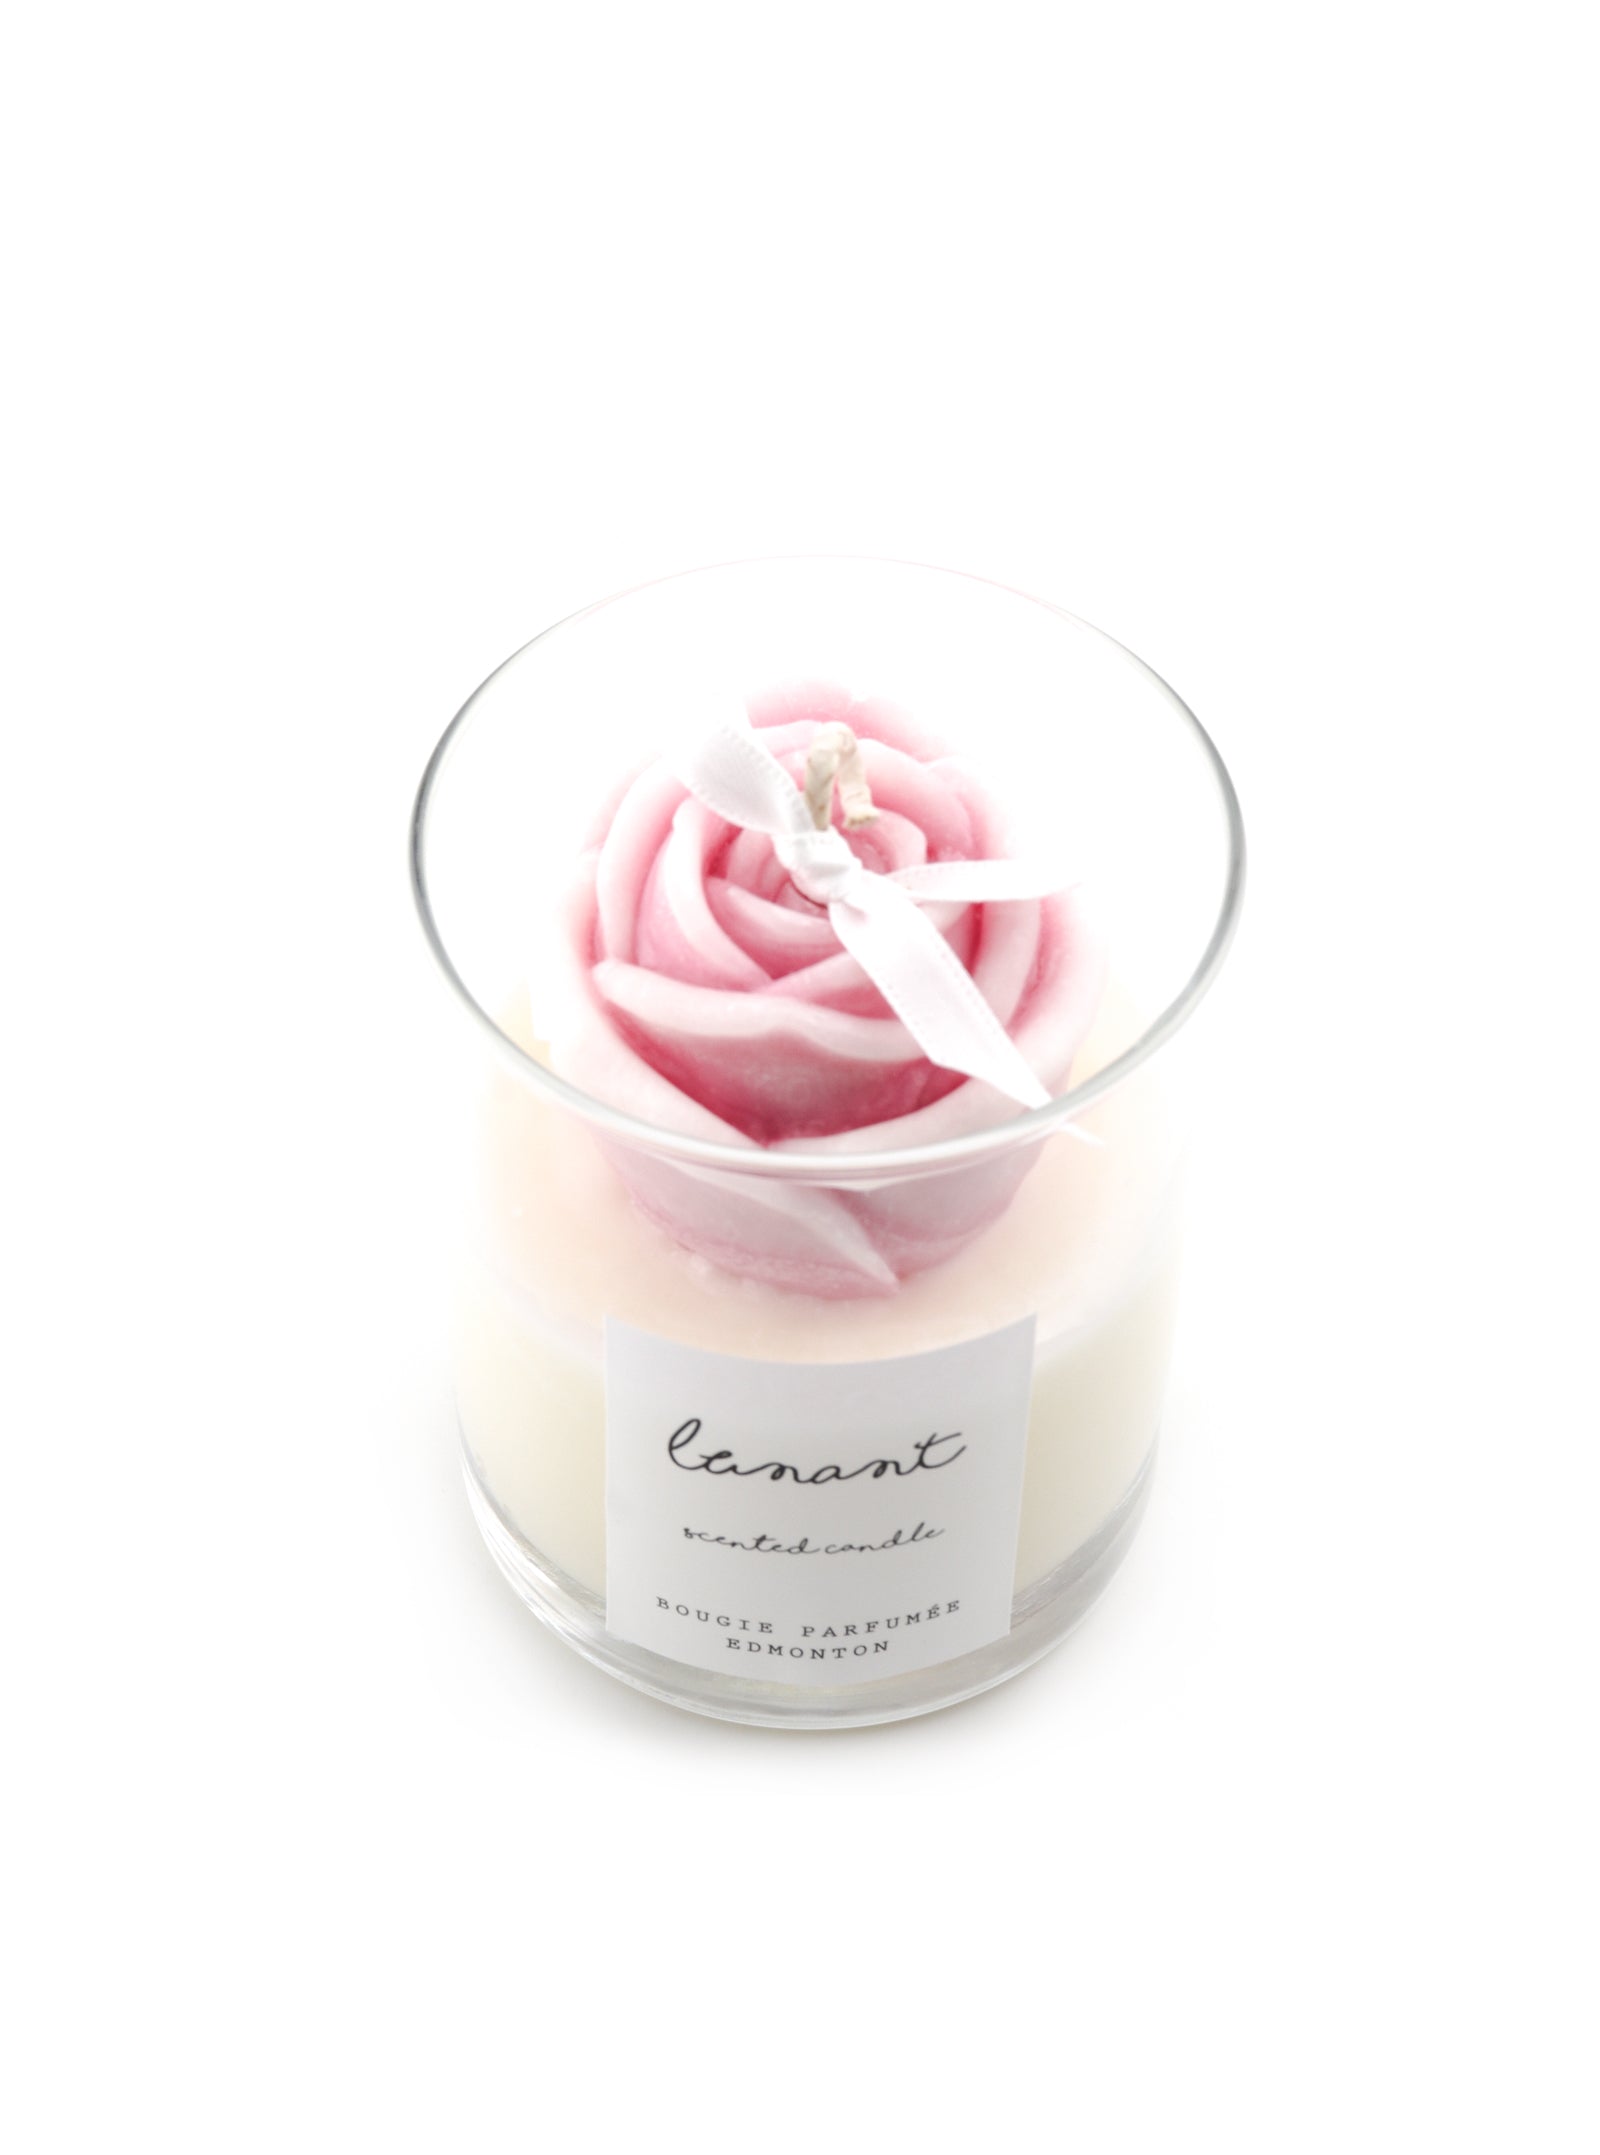 BLING ROSE CANDLE